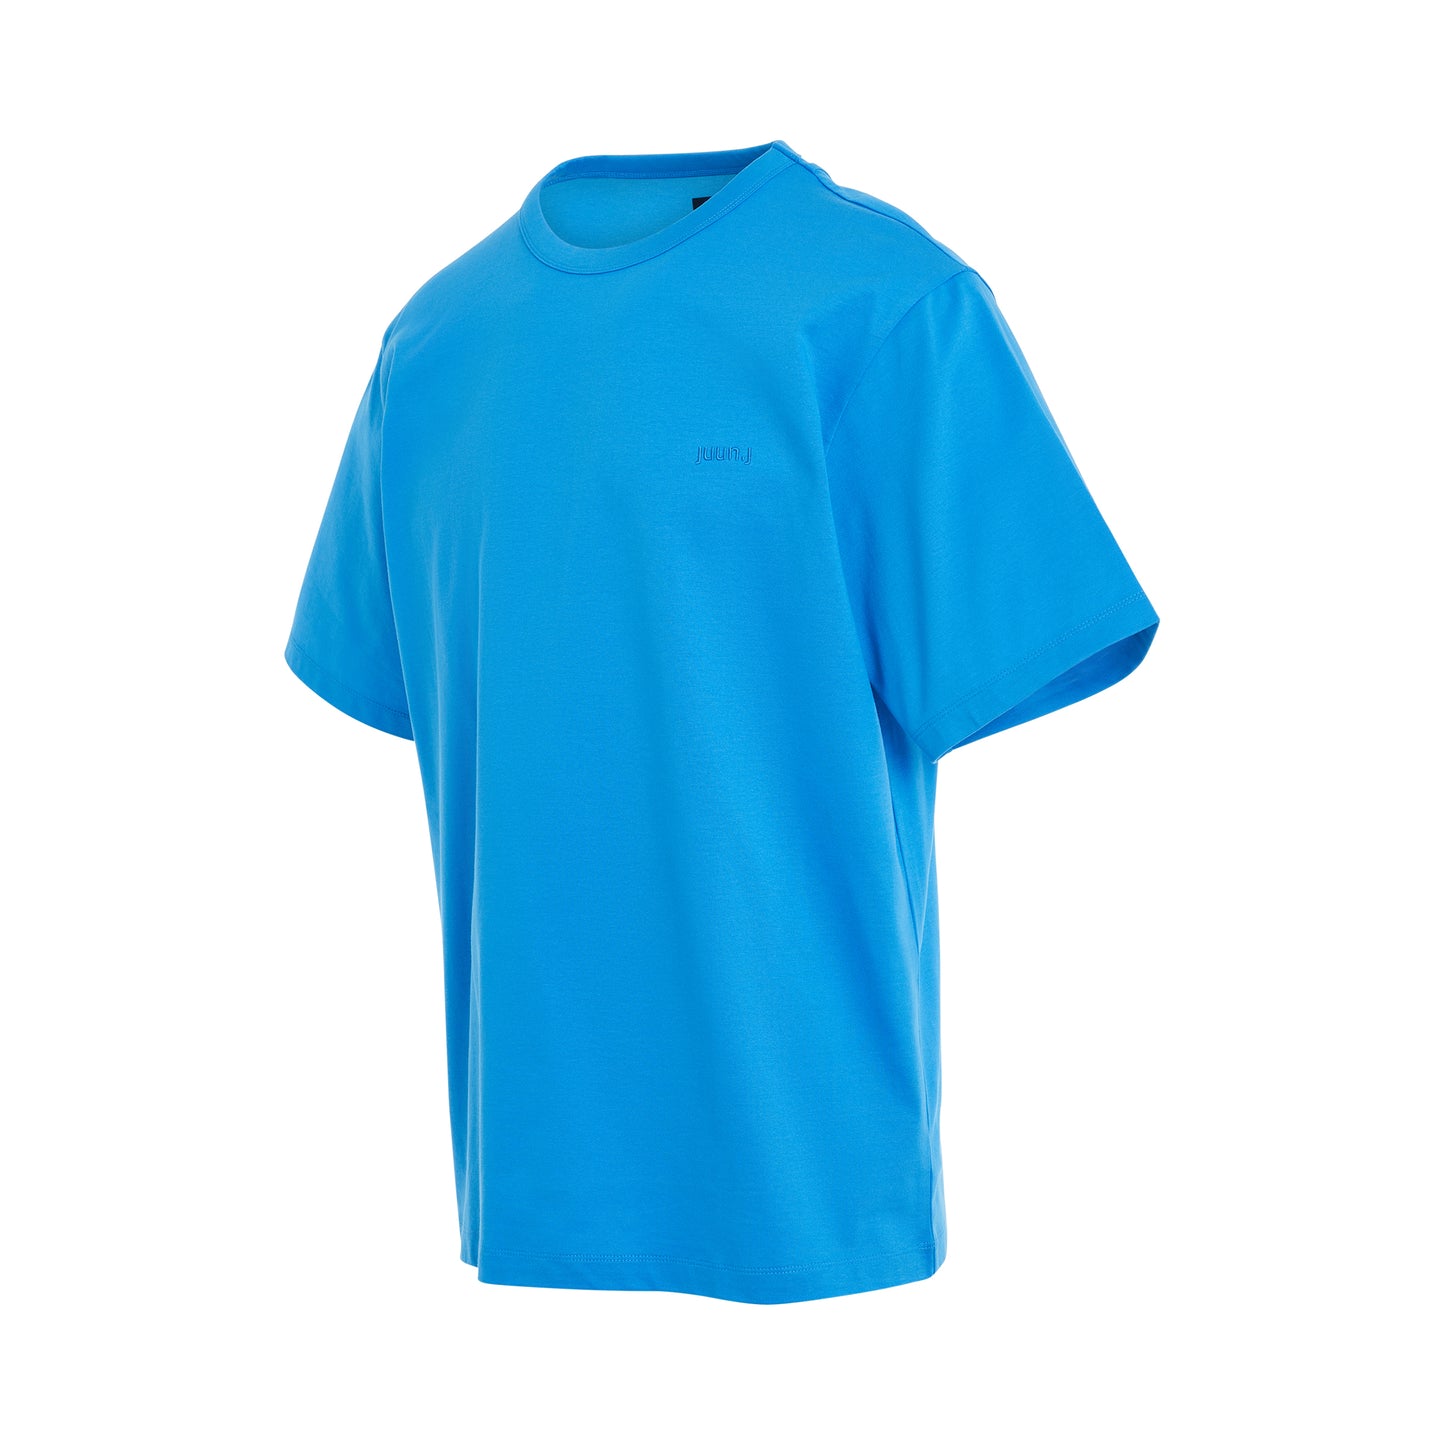 Loose Fit Short Sleeve T-Shirt in Blue